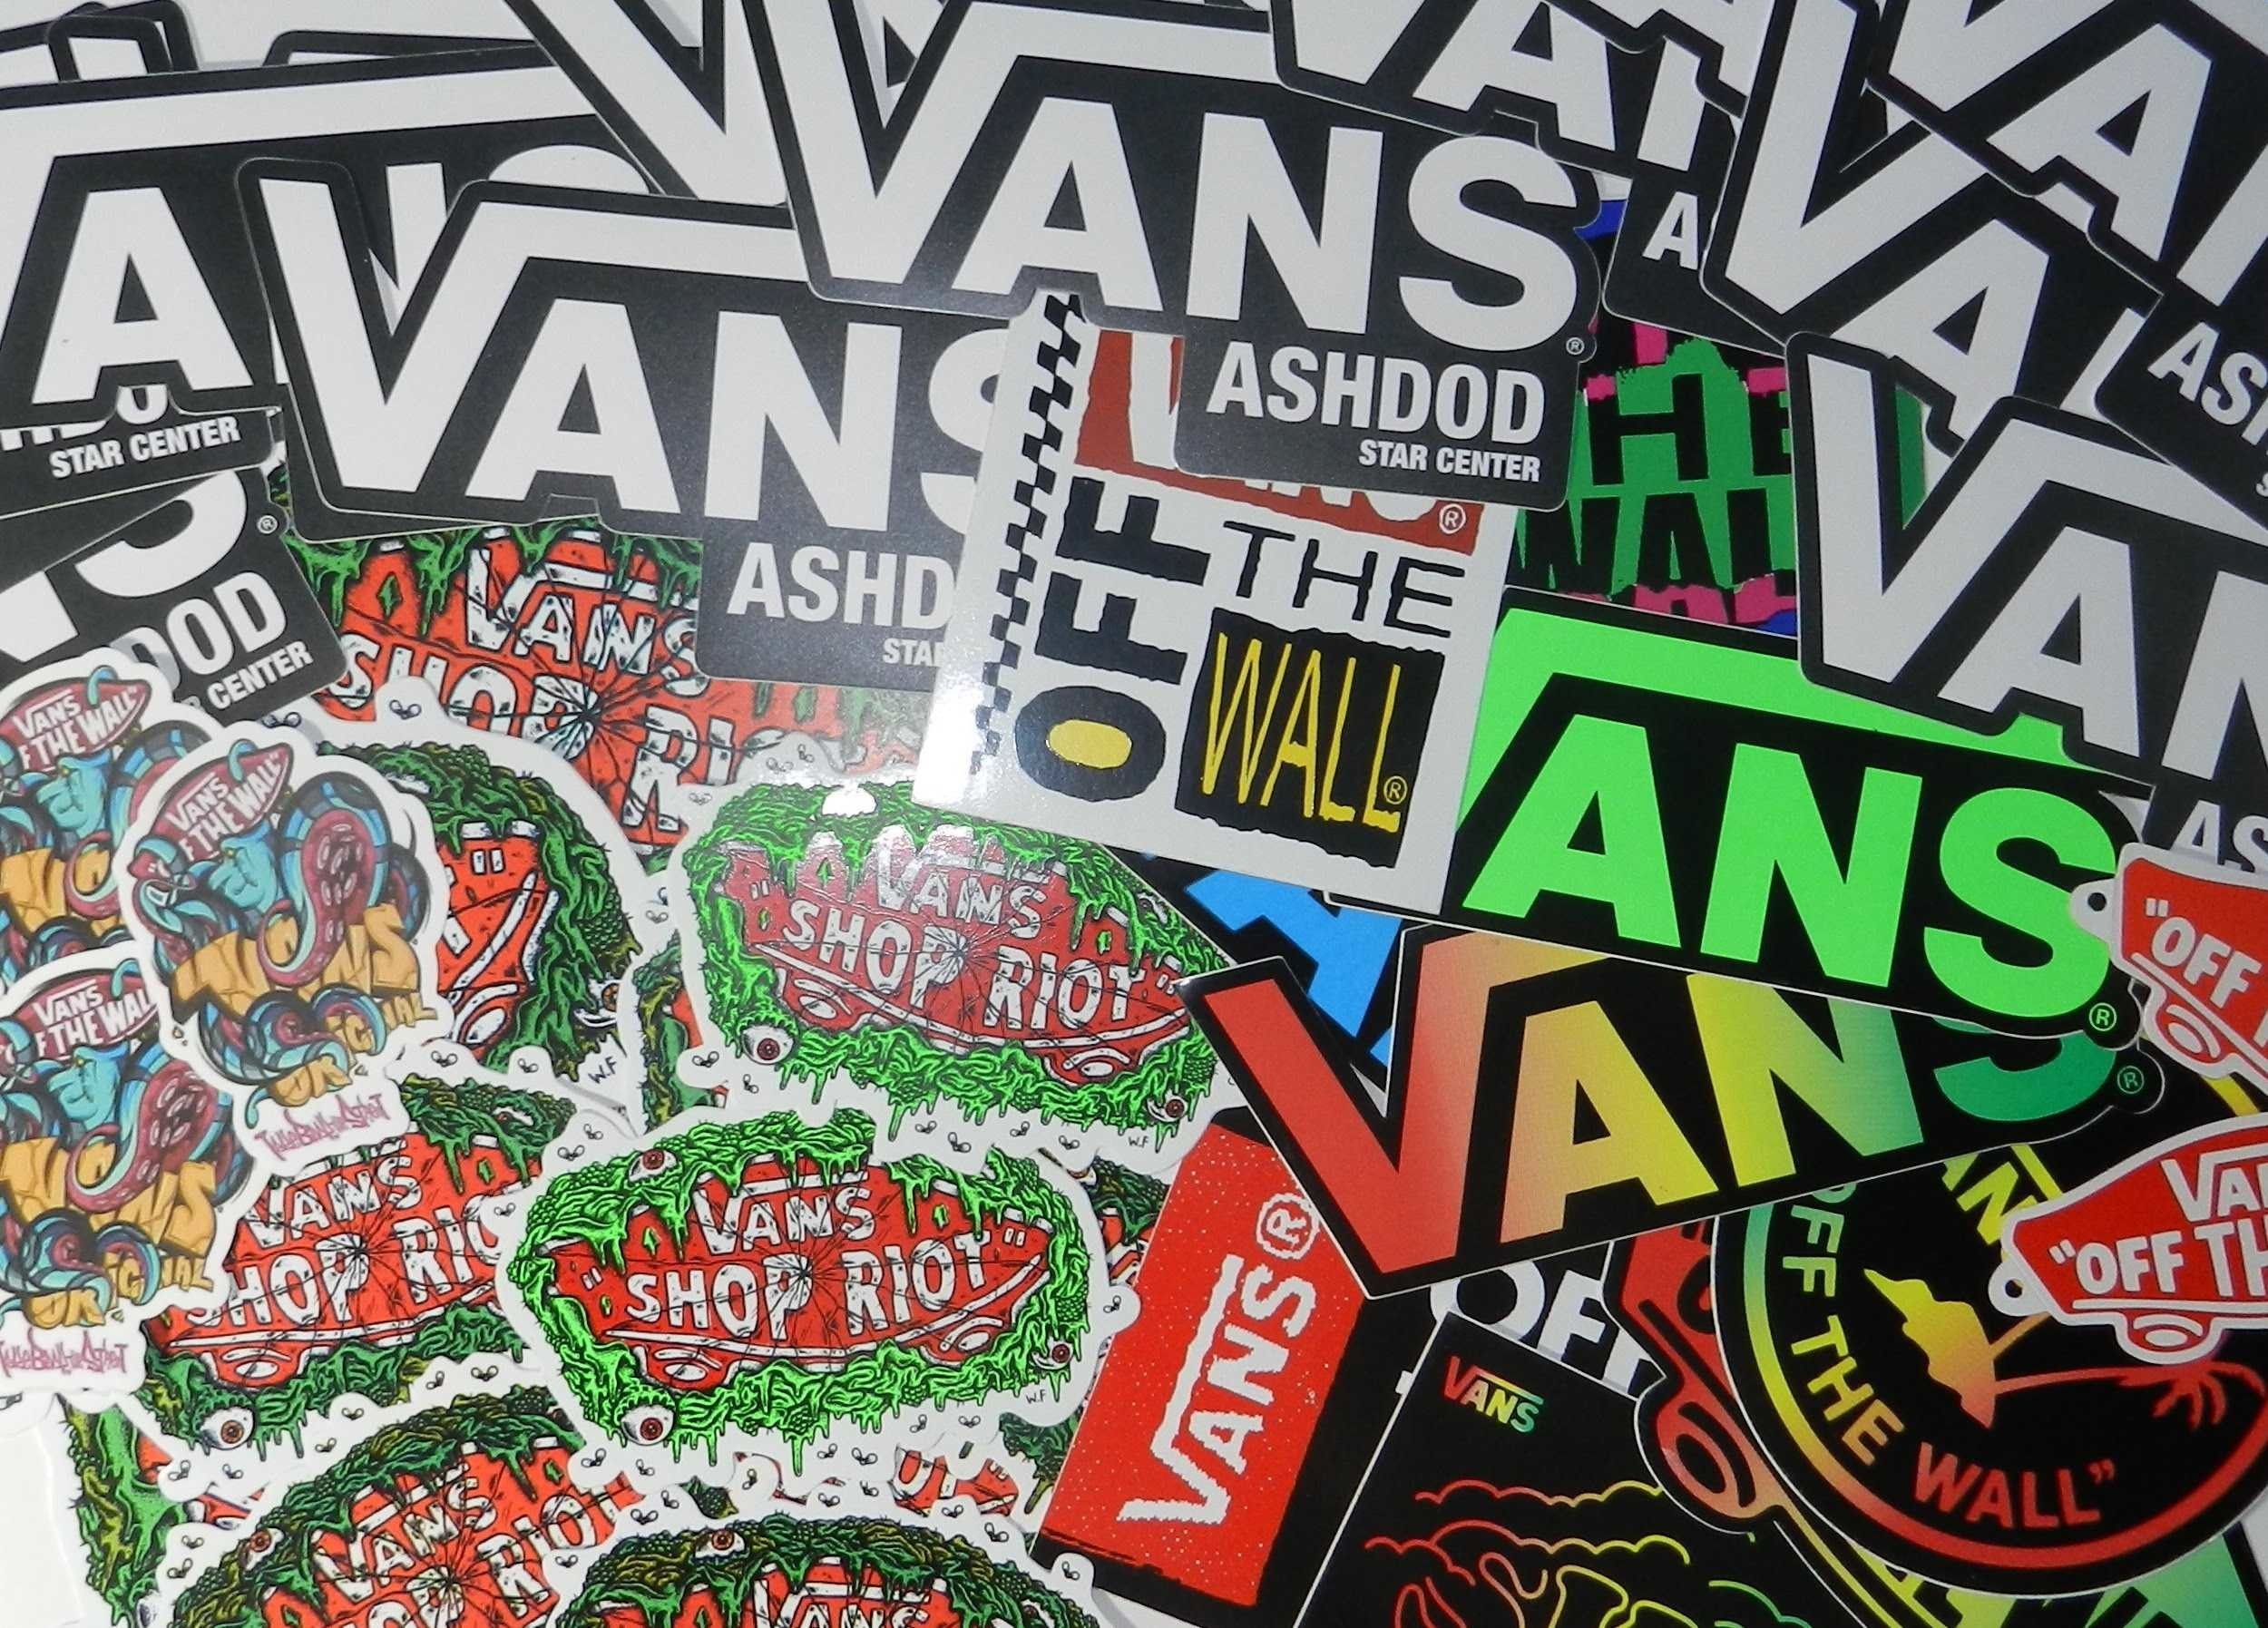 Vans Off The Wall Wallpaper 60 Pictures